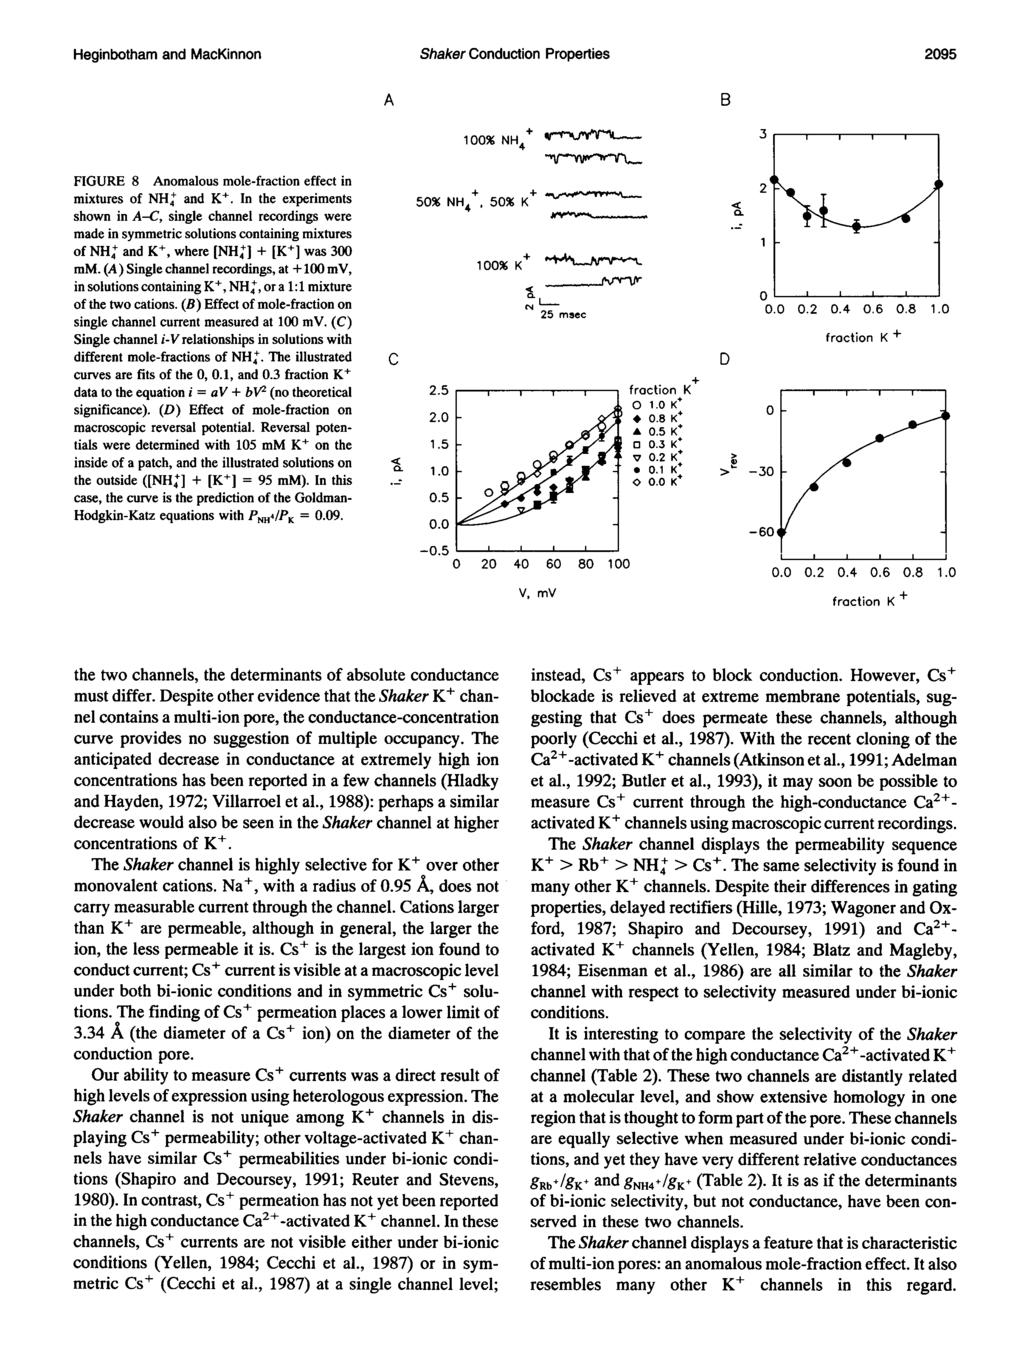 Heginbotham and MaKinnon Shaker Condution Properties 95 A B FIGURE 8 Anomalous mole-fration effet in mixtures of NH' and K+.